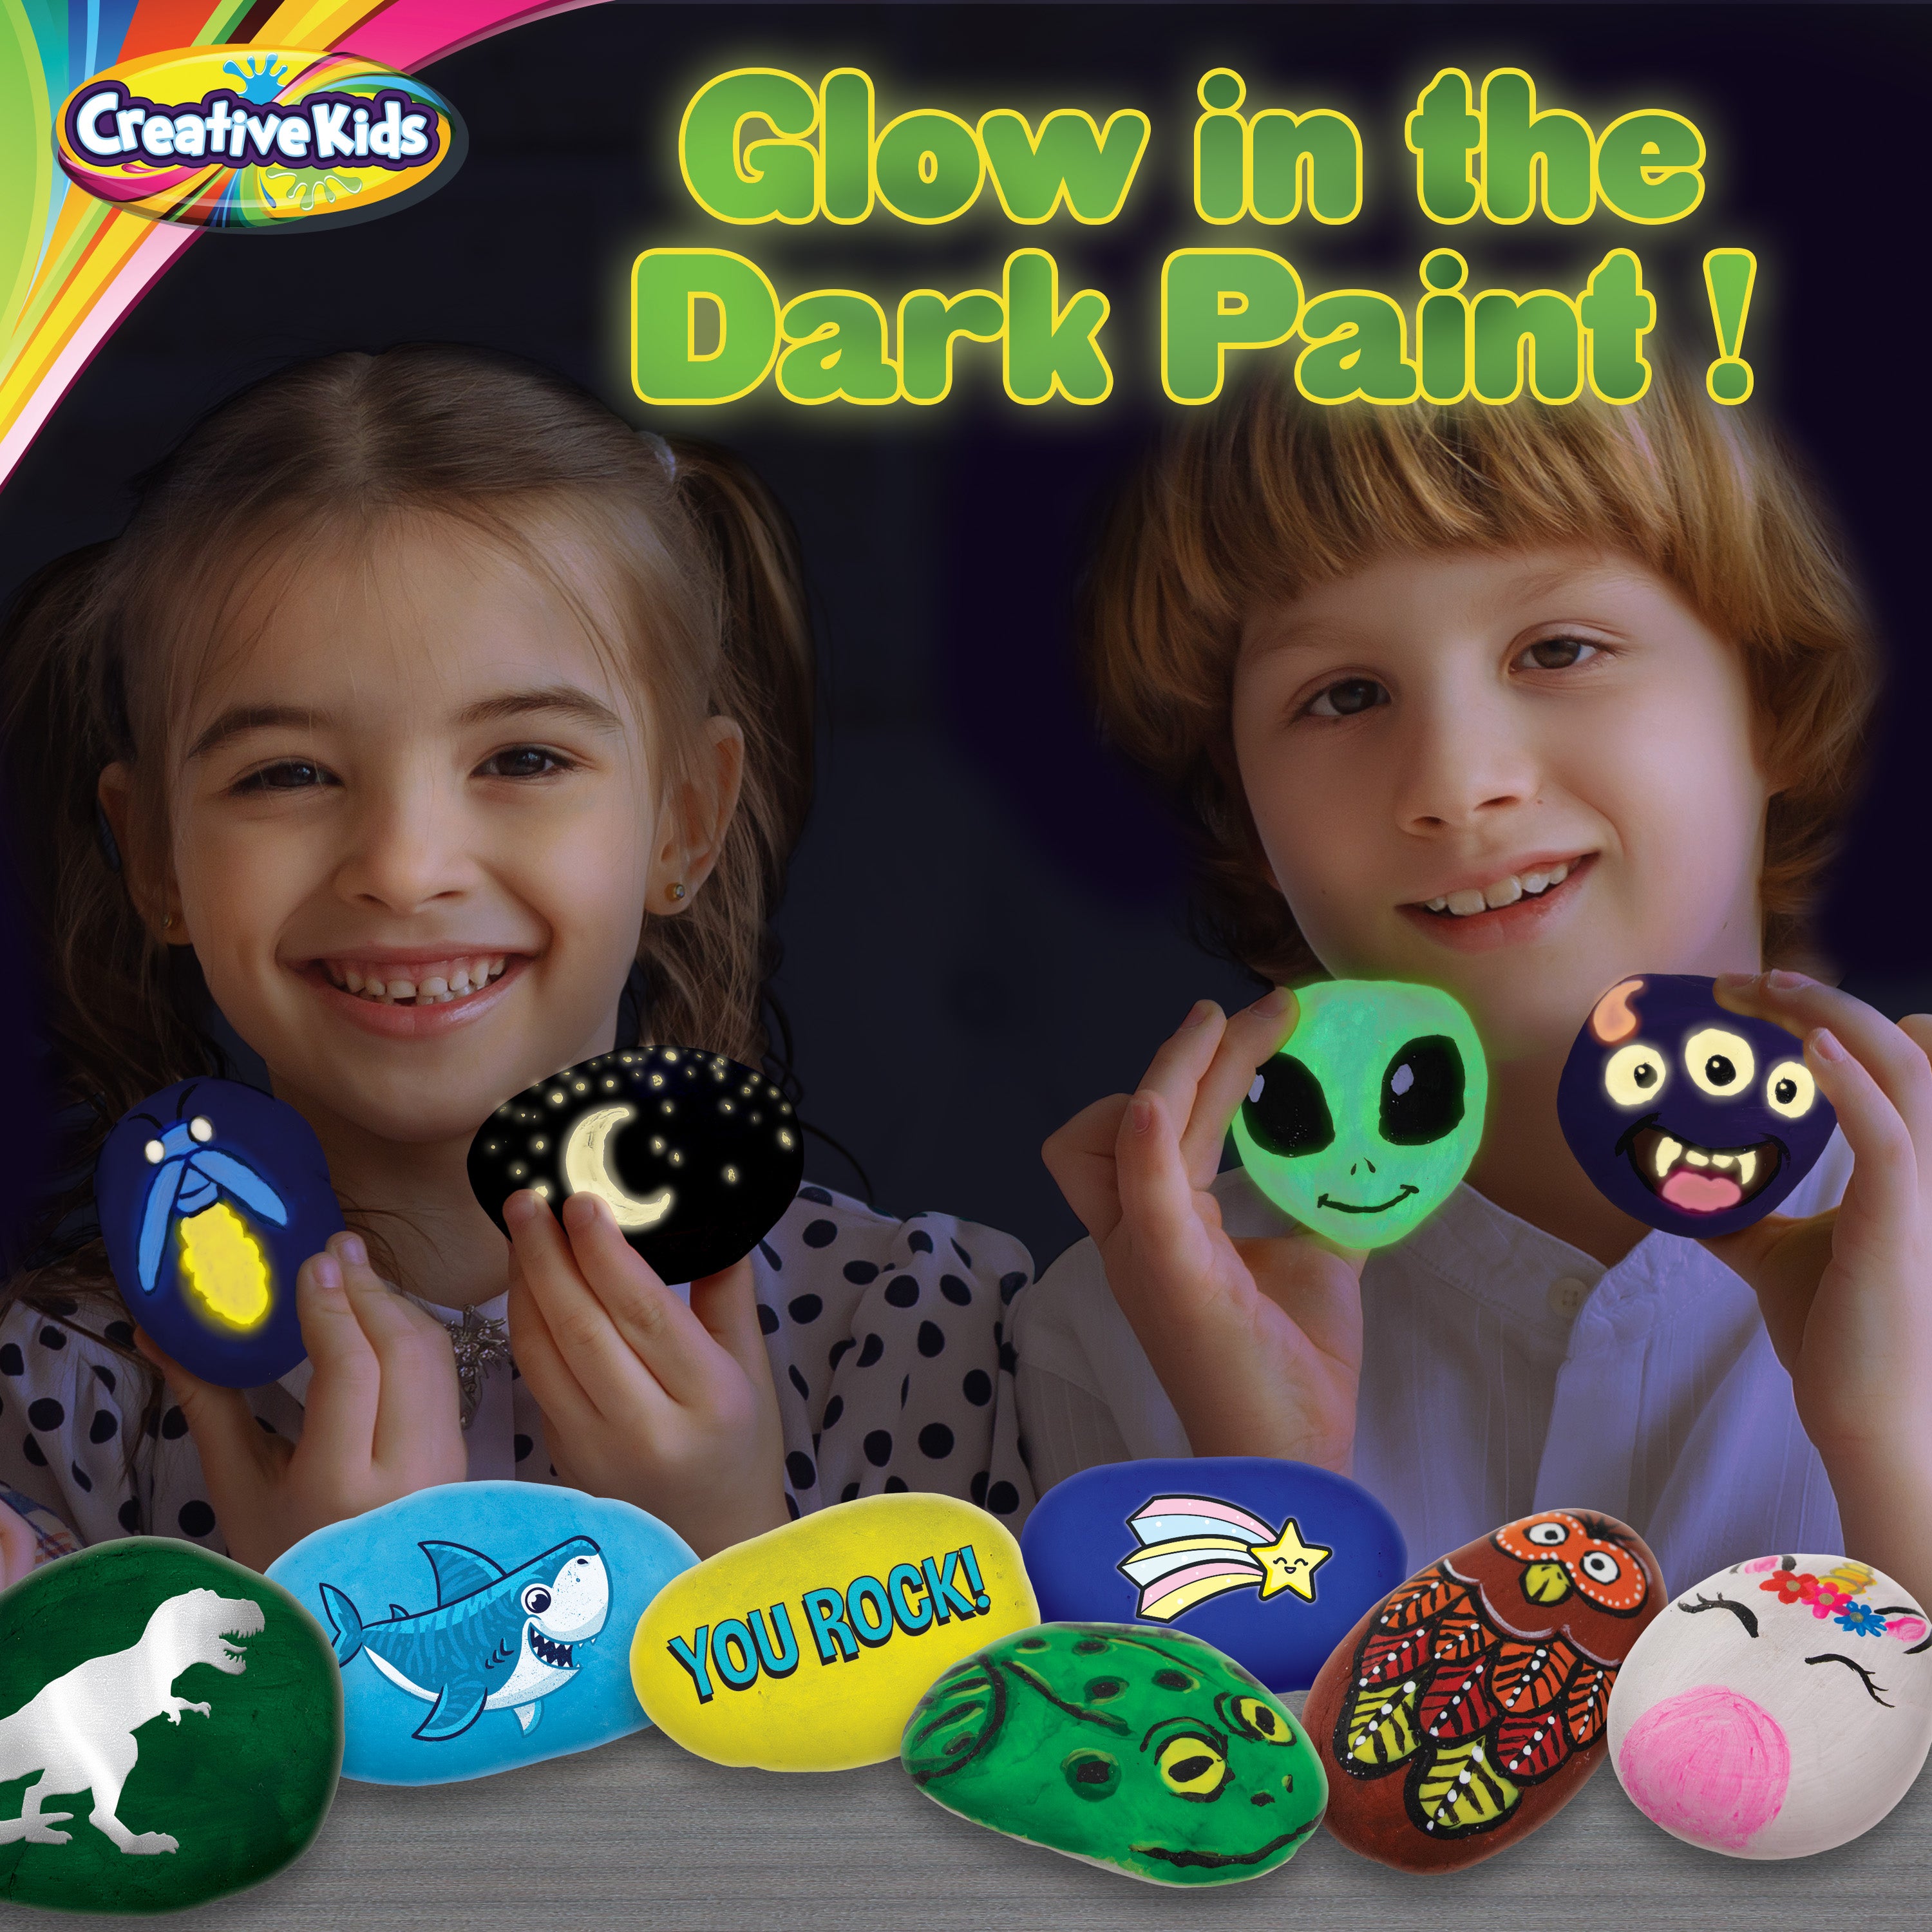 Buy glow in The Dark Rock Painting Kit for Kids - Arts and crafts for girls Boys  Ages 6-12 - Art craft Kits Paint Set - Supplies for Painting Rocks - DIY